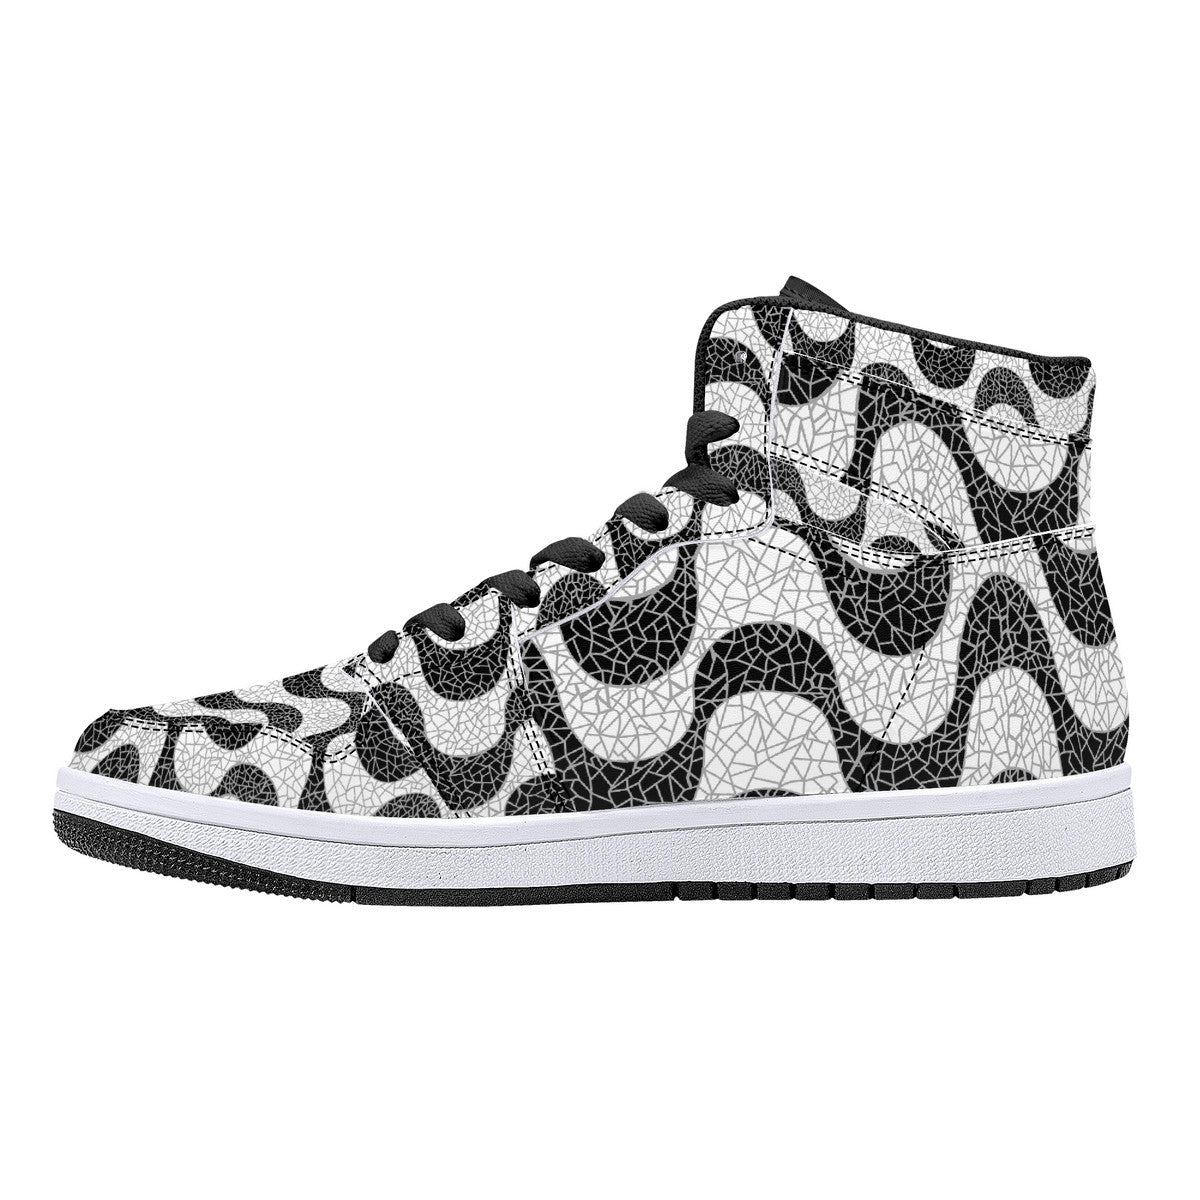 "Copacabana" High-Top Synthetic Leather Sneakers